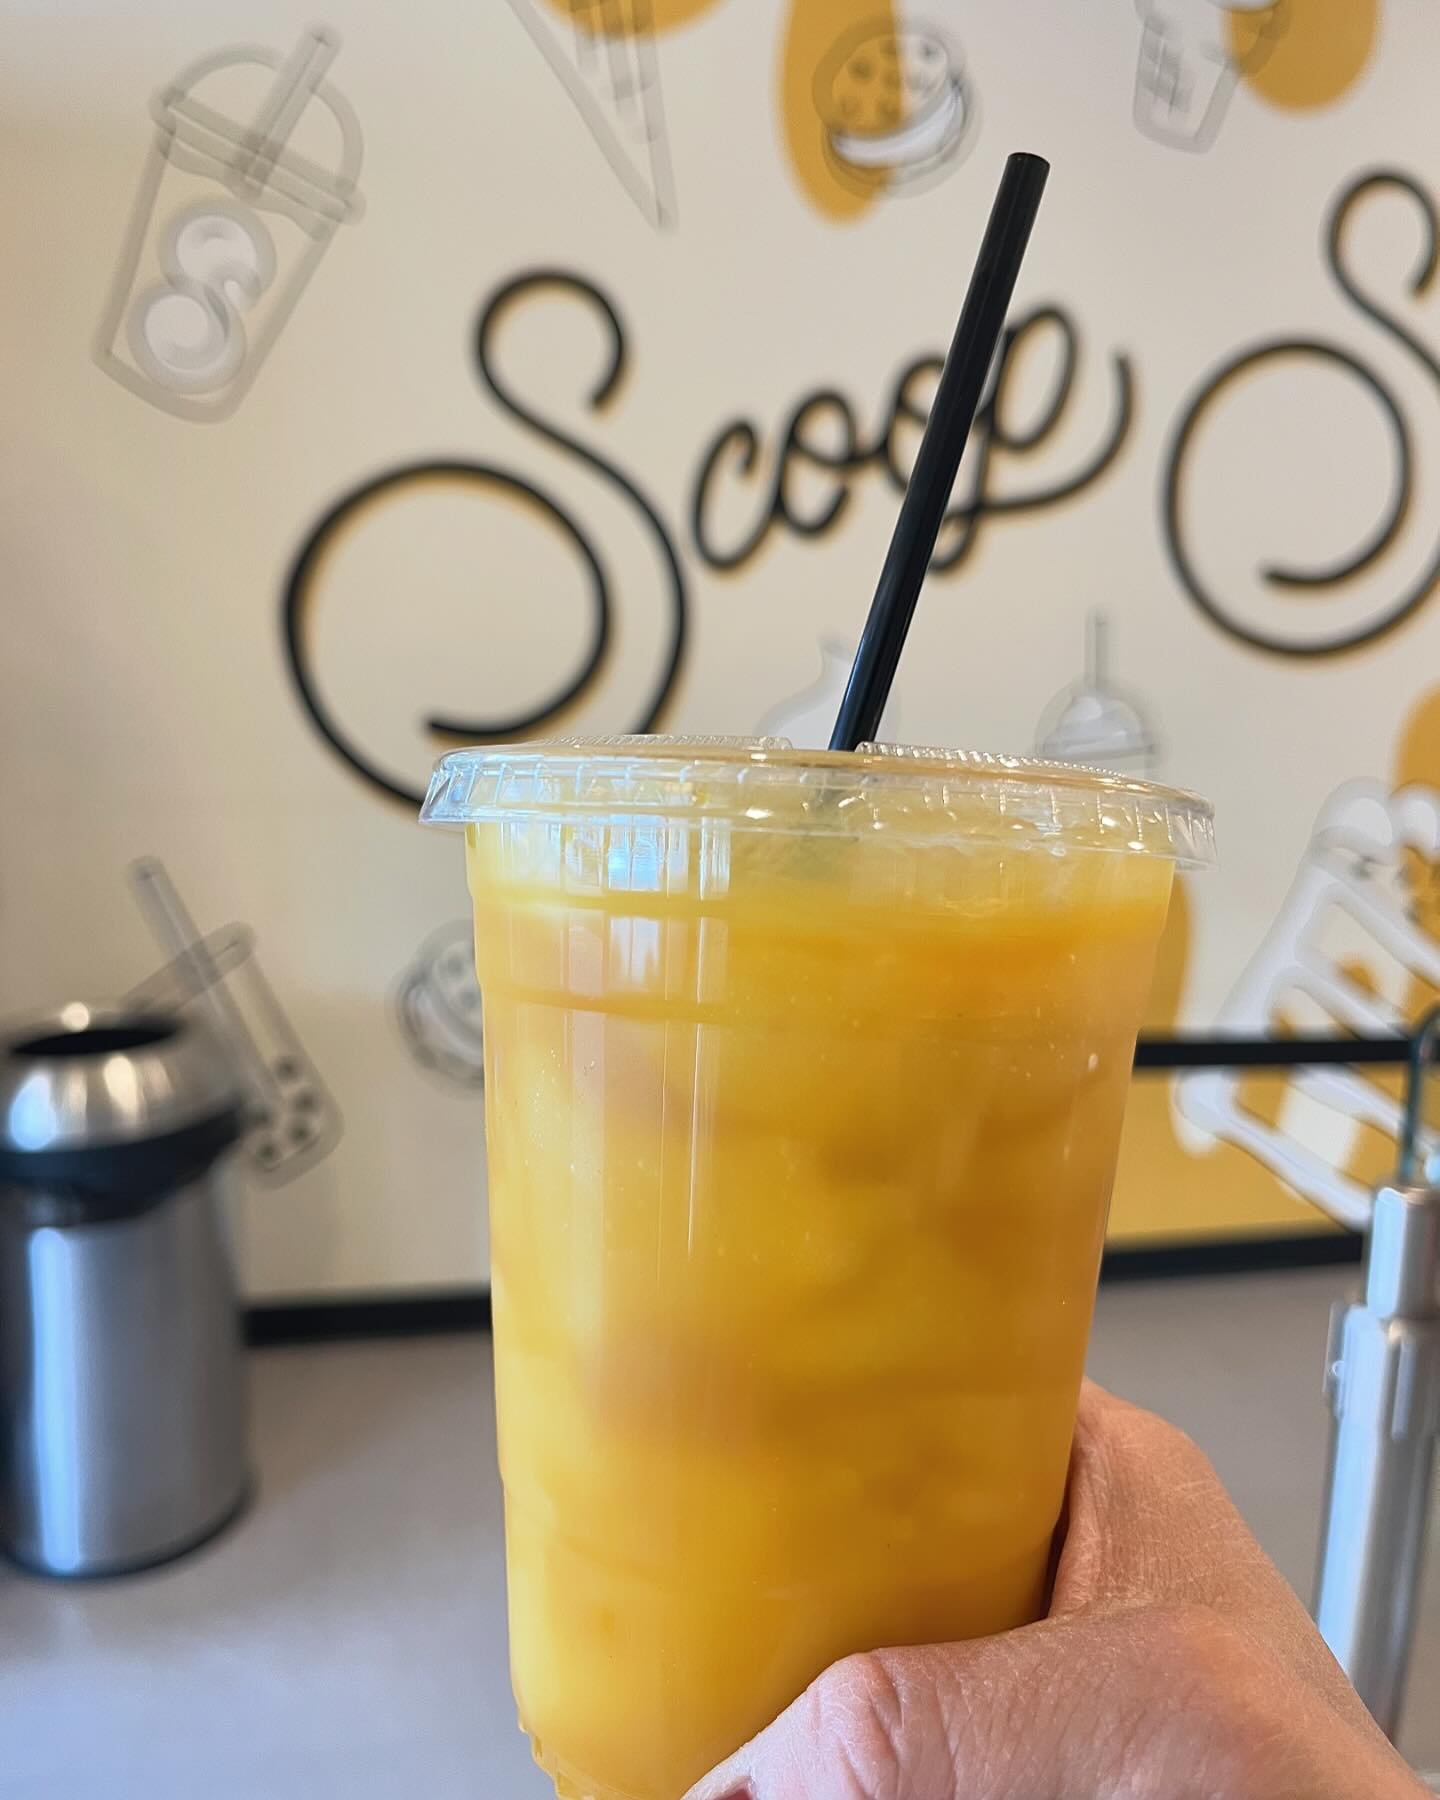 TGIF!🙌 Enjoying this PINEAPPLE 🍍 PARADISE SMOOTHIE to kick off the weekend!
⠀⠀⠀⠀⠀⠀⠀⠀⠀⠀⠀⠀⠀⠀⠀⠀⠀⠀
Come on by!
🌷Sun: Noon-9pm
🌷Mon-Thur: 1pm-9pm
🌷Fri: 1pm-10pm
🌷Sat: Noon-10pm
Or get it delivered with DoorDash! 

⠀⠀⠀⠀⠀⠀⠀⠀⠀⠀⠀⠀⠀⠀⠀⠀⠀⠀ 
⠀⠀⠀⠀⠀⠀⠀⠀⠀⠀⠀⠀⠀⠀⠀